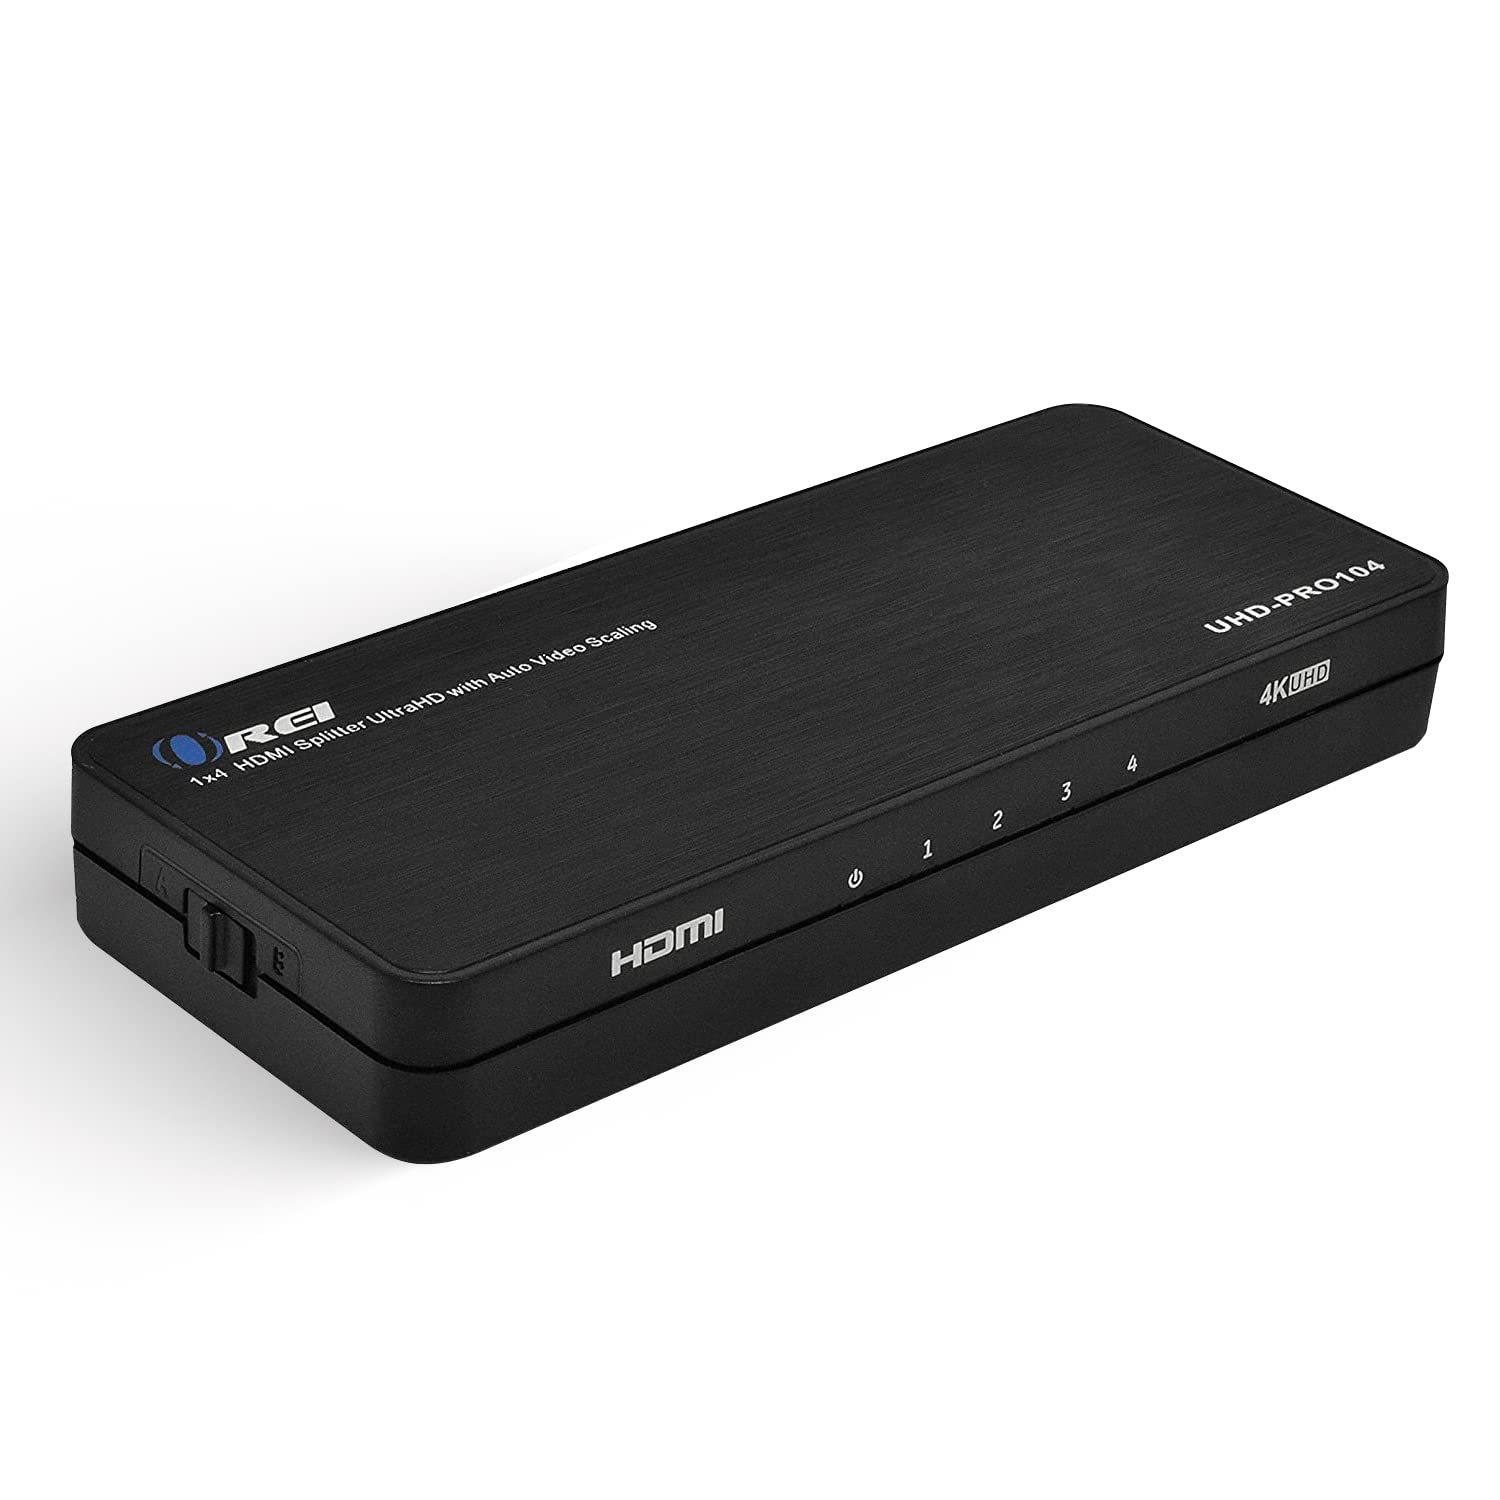 OREI 4K 1x4 HDMI Splitter Duplicater - with Down Scaler 4 Ports with Full Ultra HD, HDCP 2.2, Upto 4K at 60Hz, 1080p & 3D Supports EDID Control - UHDPRO-104, Model Number: UHD-PRO104